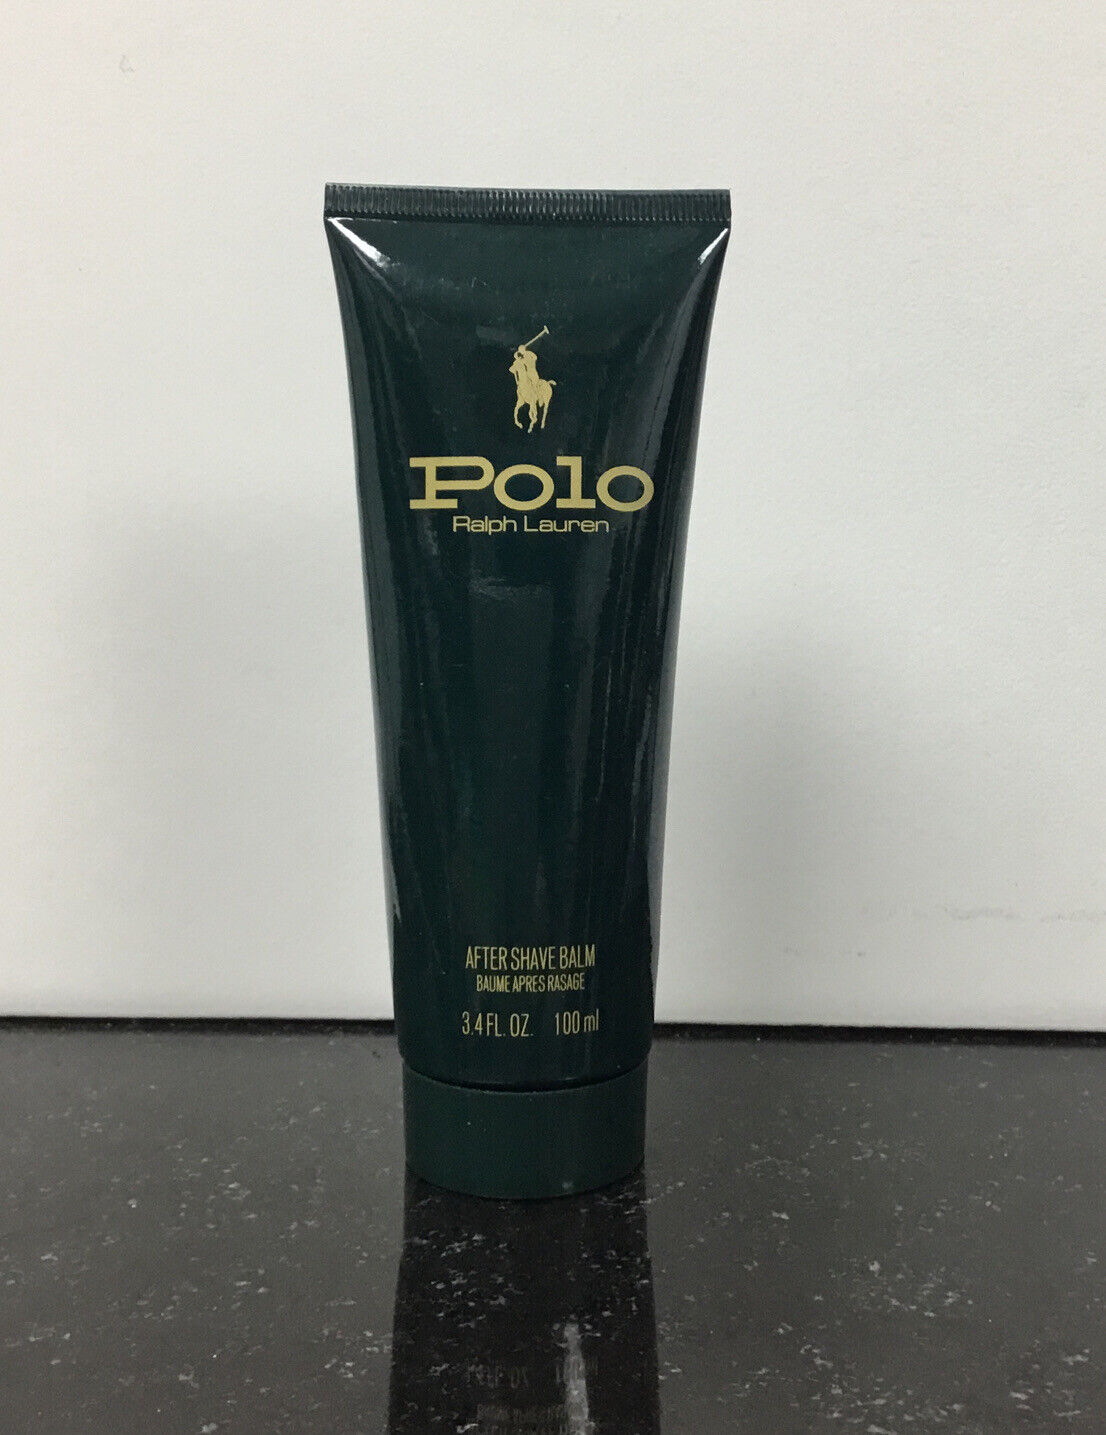 POLO GREEN by RALPH LAUREN After Shave Balm, Aftershave, 3.4 oz., 100 ml, NEW